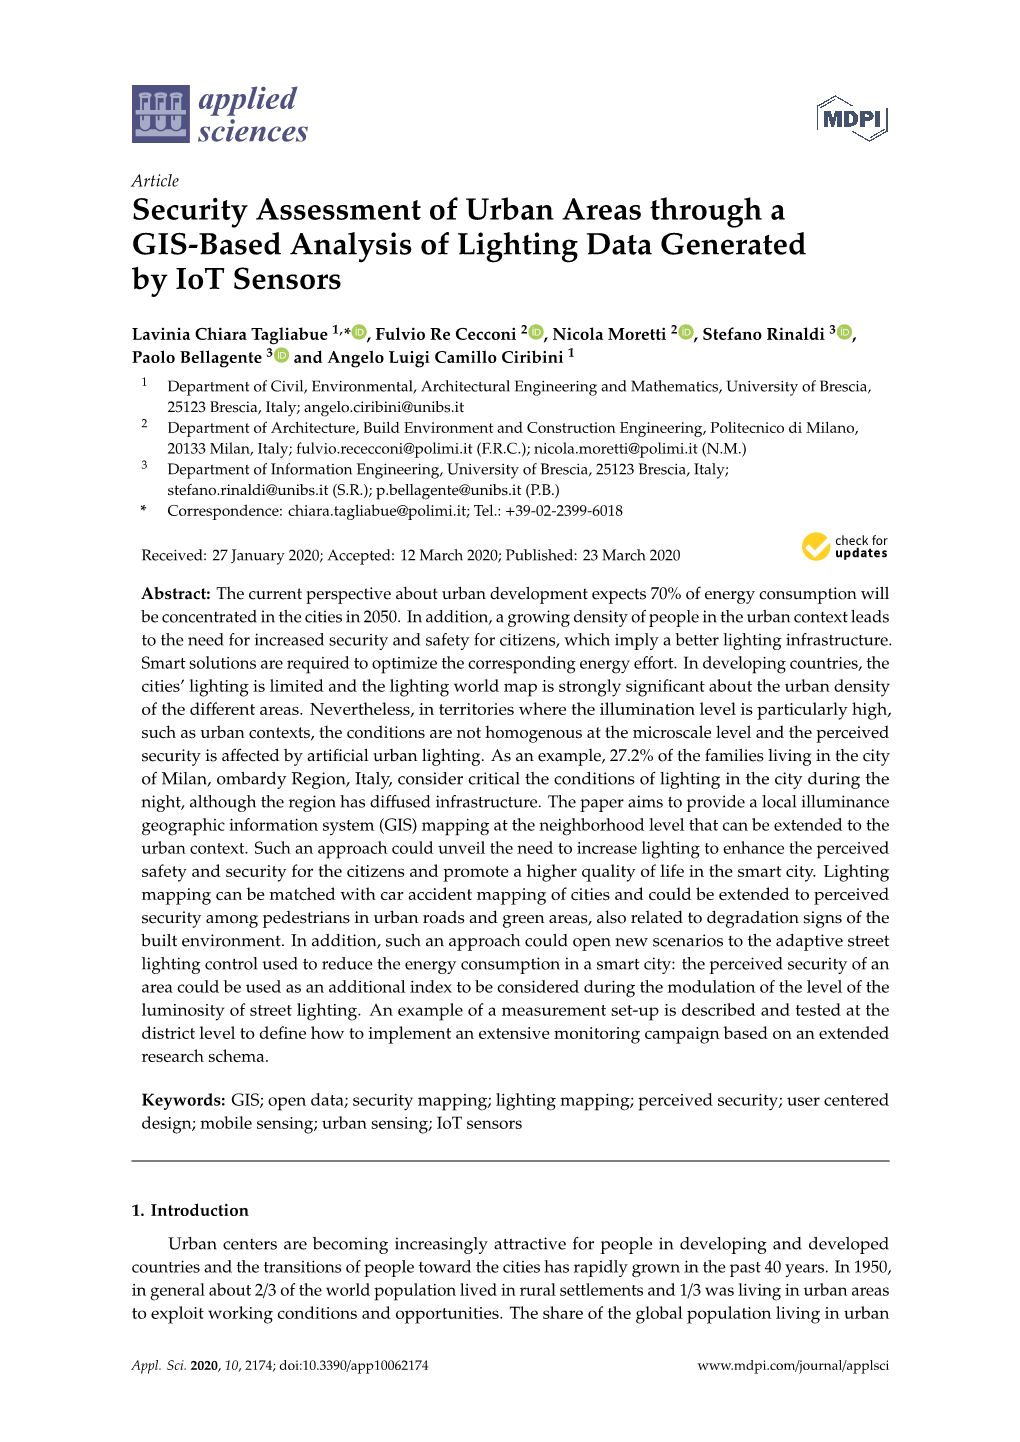 Security Assessment of Urban Areas Through a GIS-Based Analysis of Lighting Data Generated by Iot Sensors